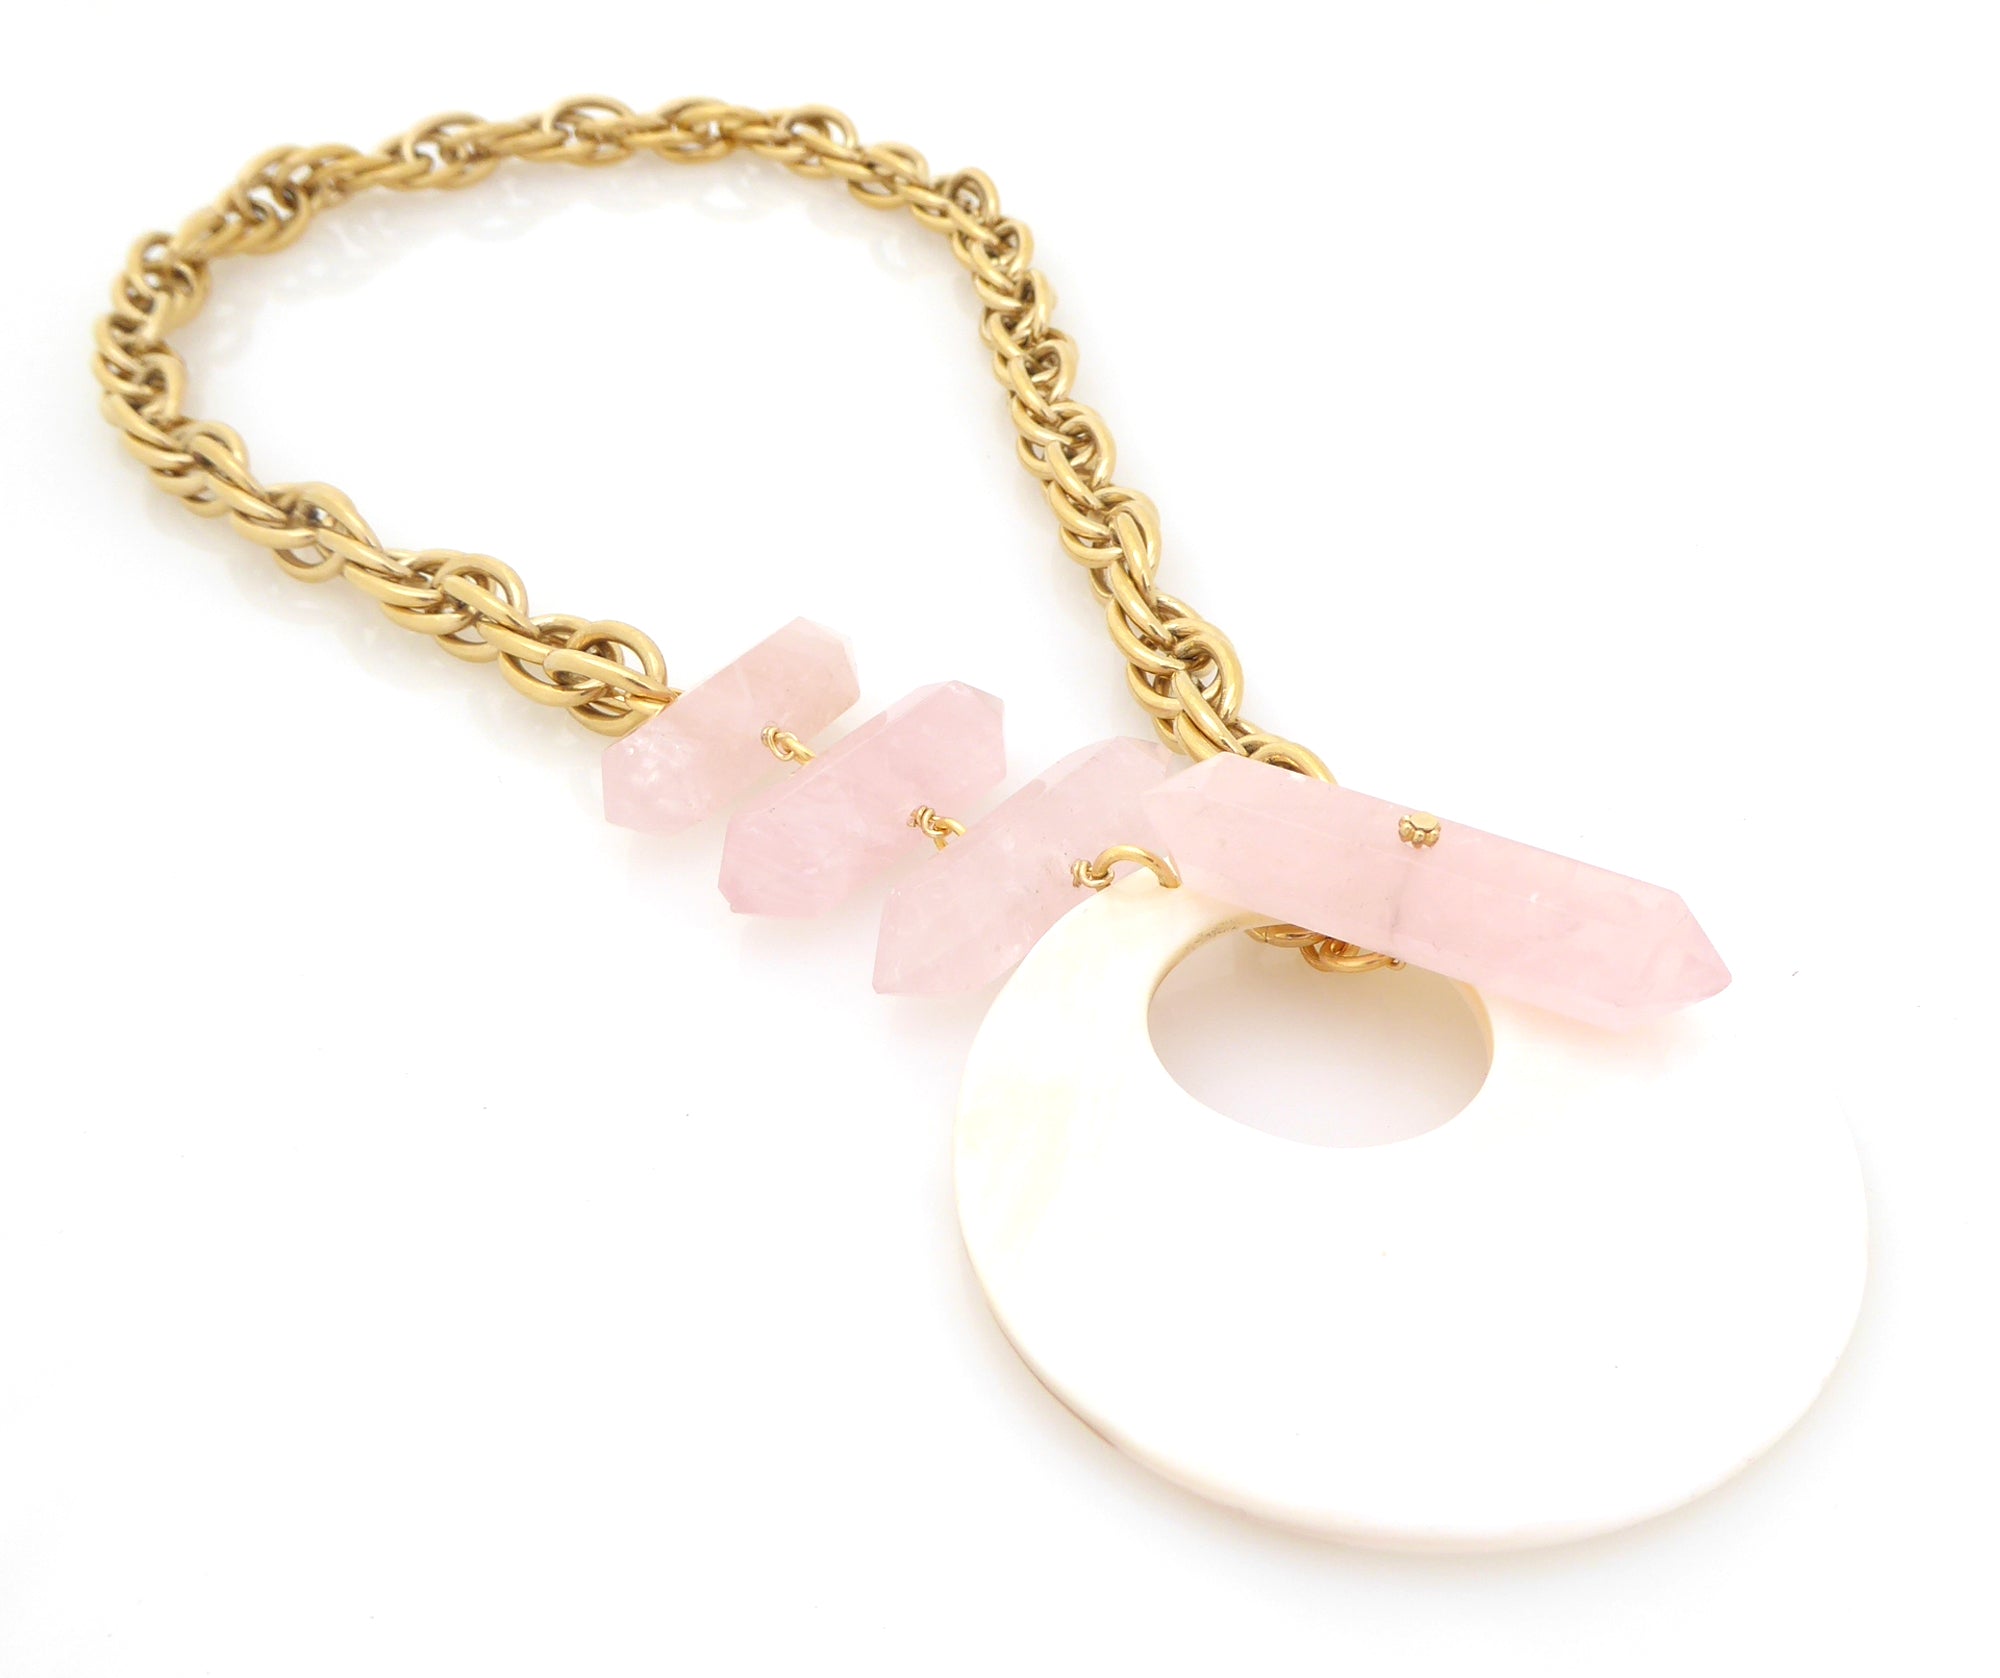 Marna rose quartz and shell necklace by Jenny Dayco 2